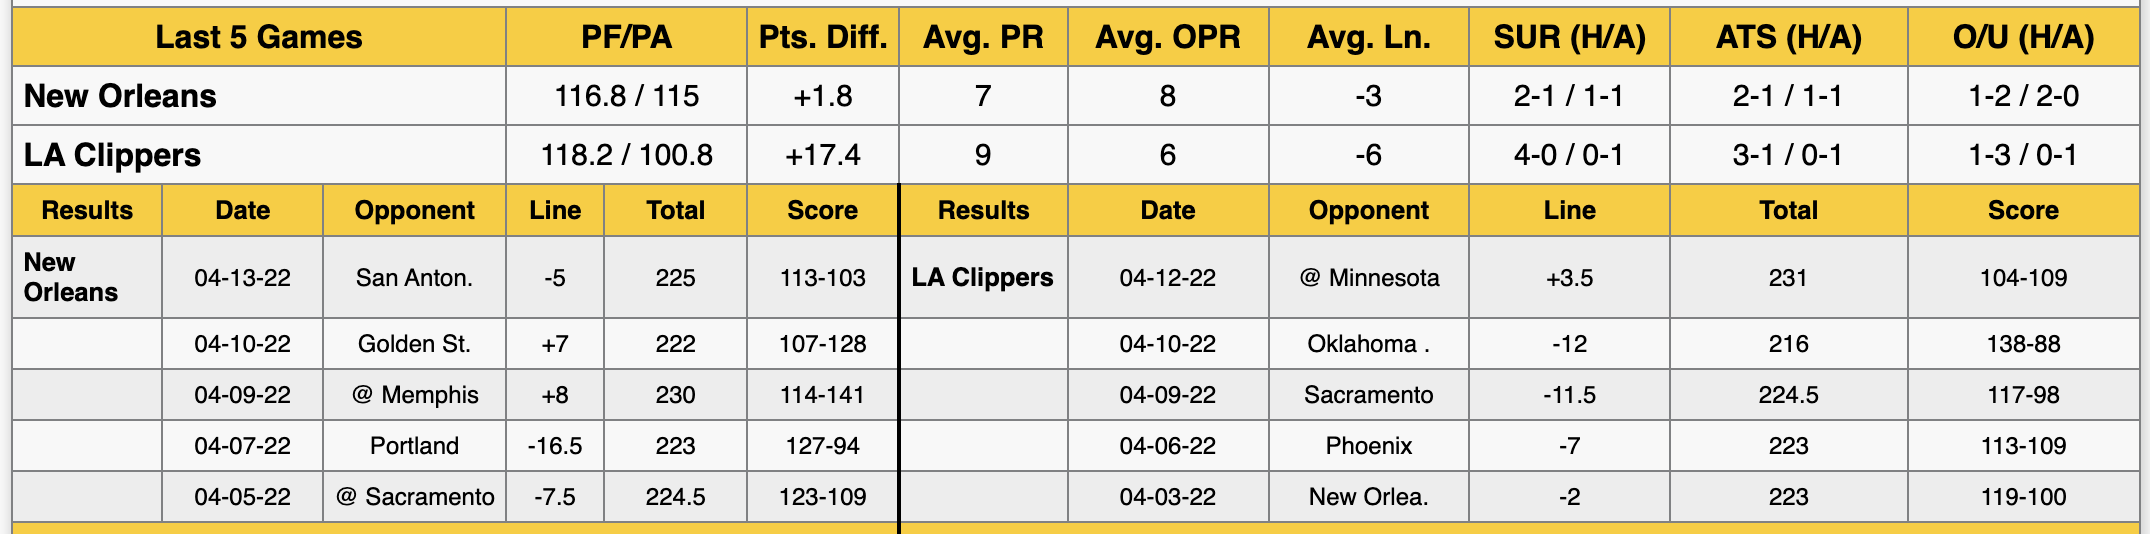 Los Angeles Clippers vs New Orleans Pelicans Data